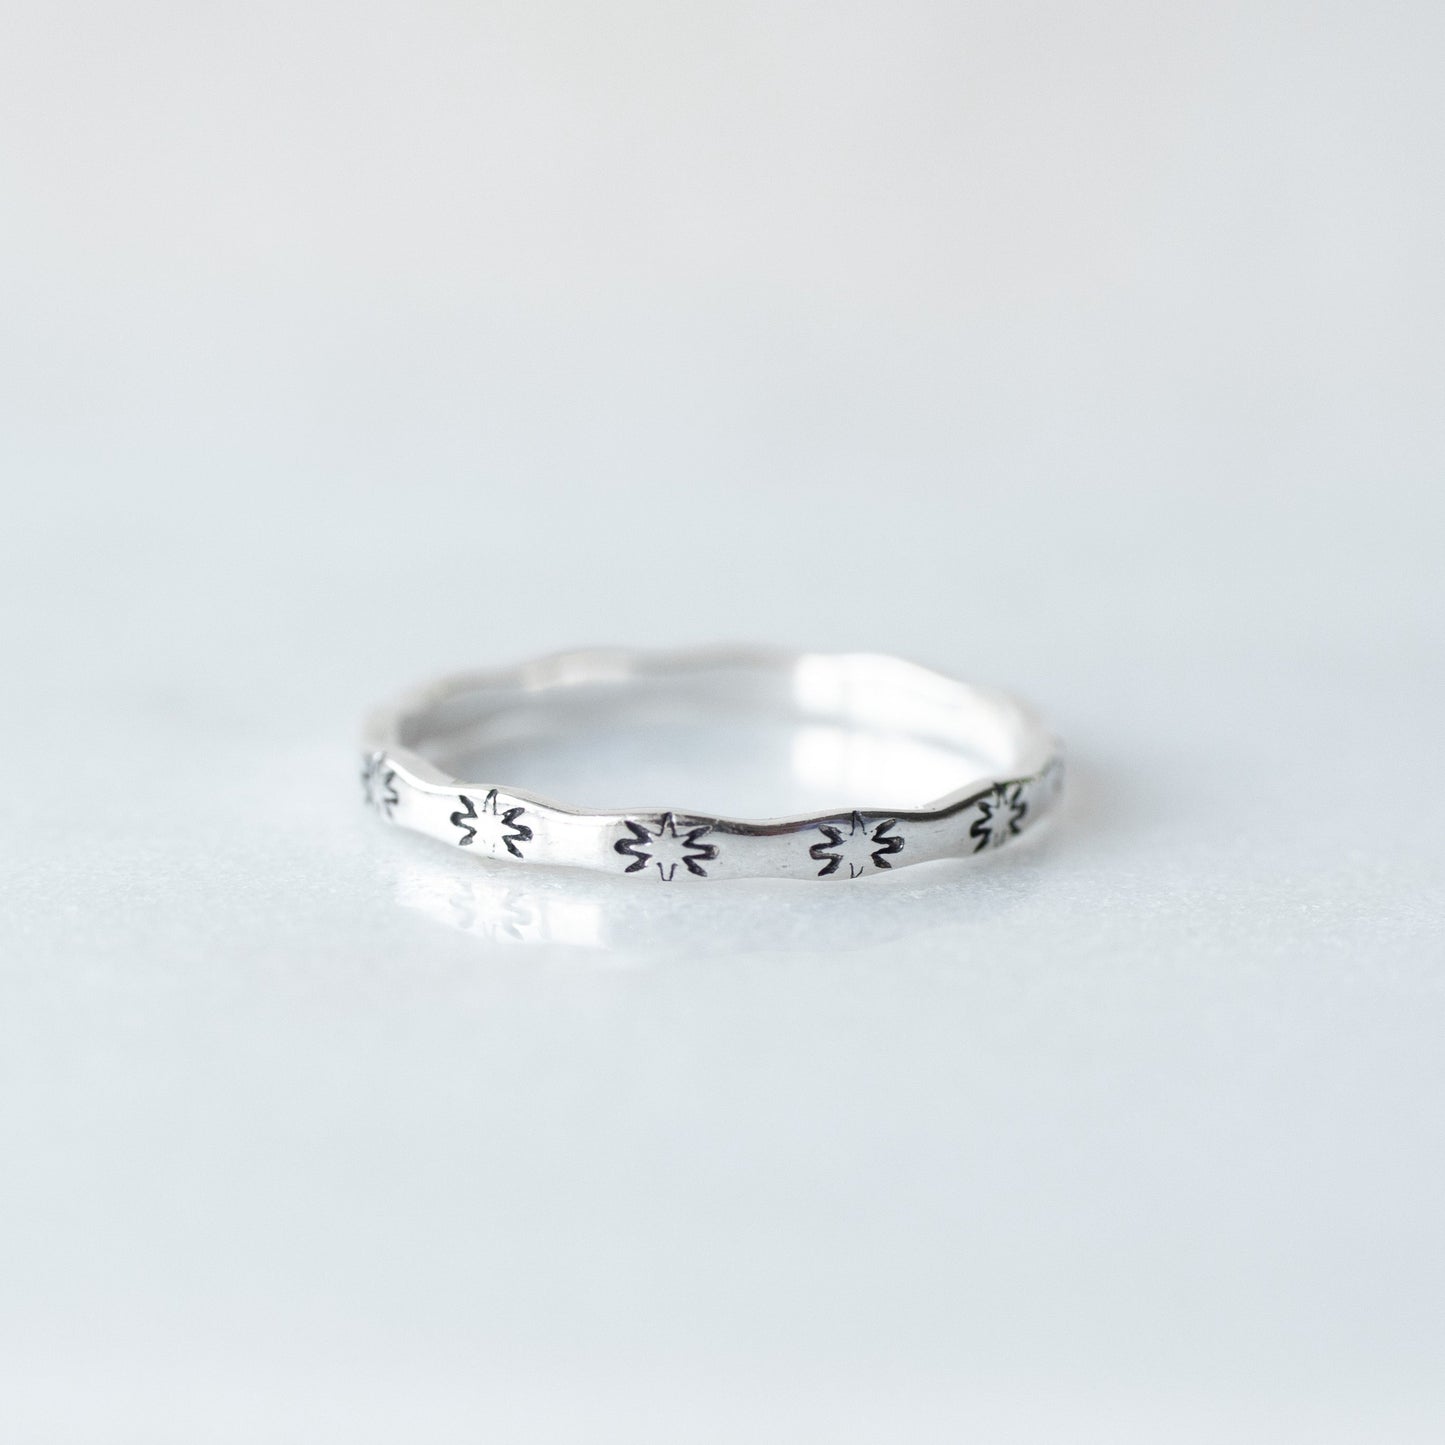 Dainty sterling silver stacking ring